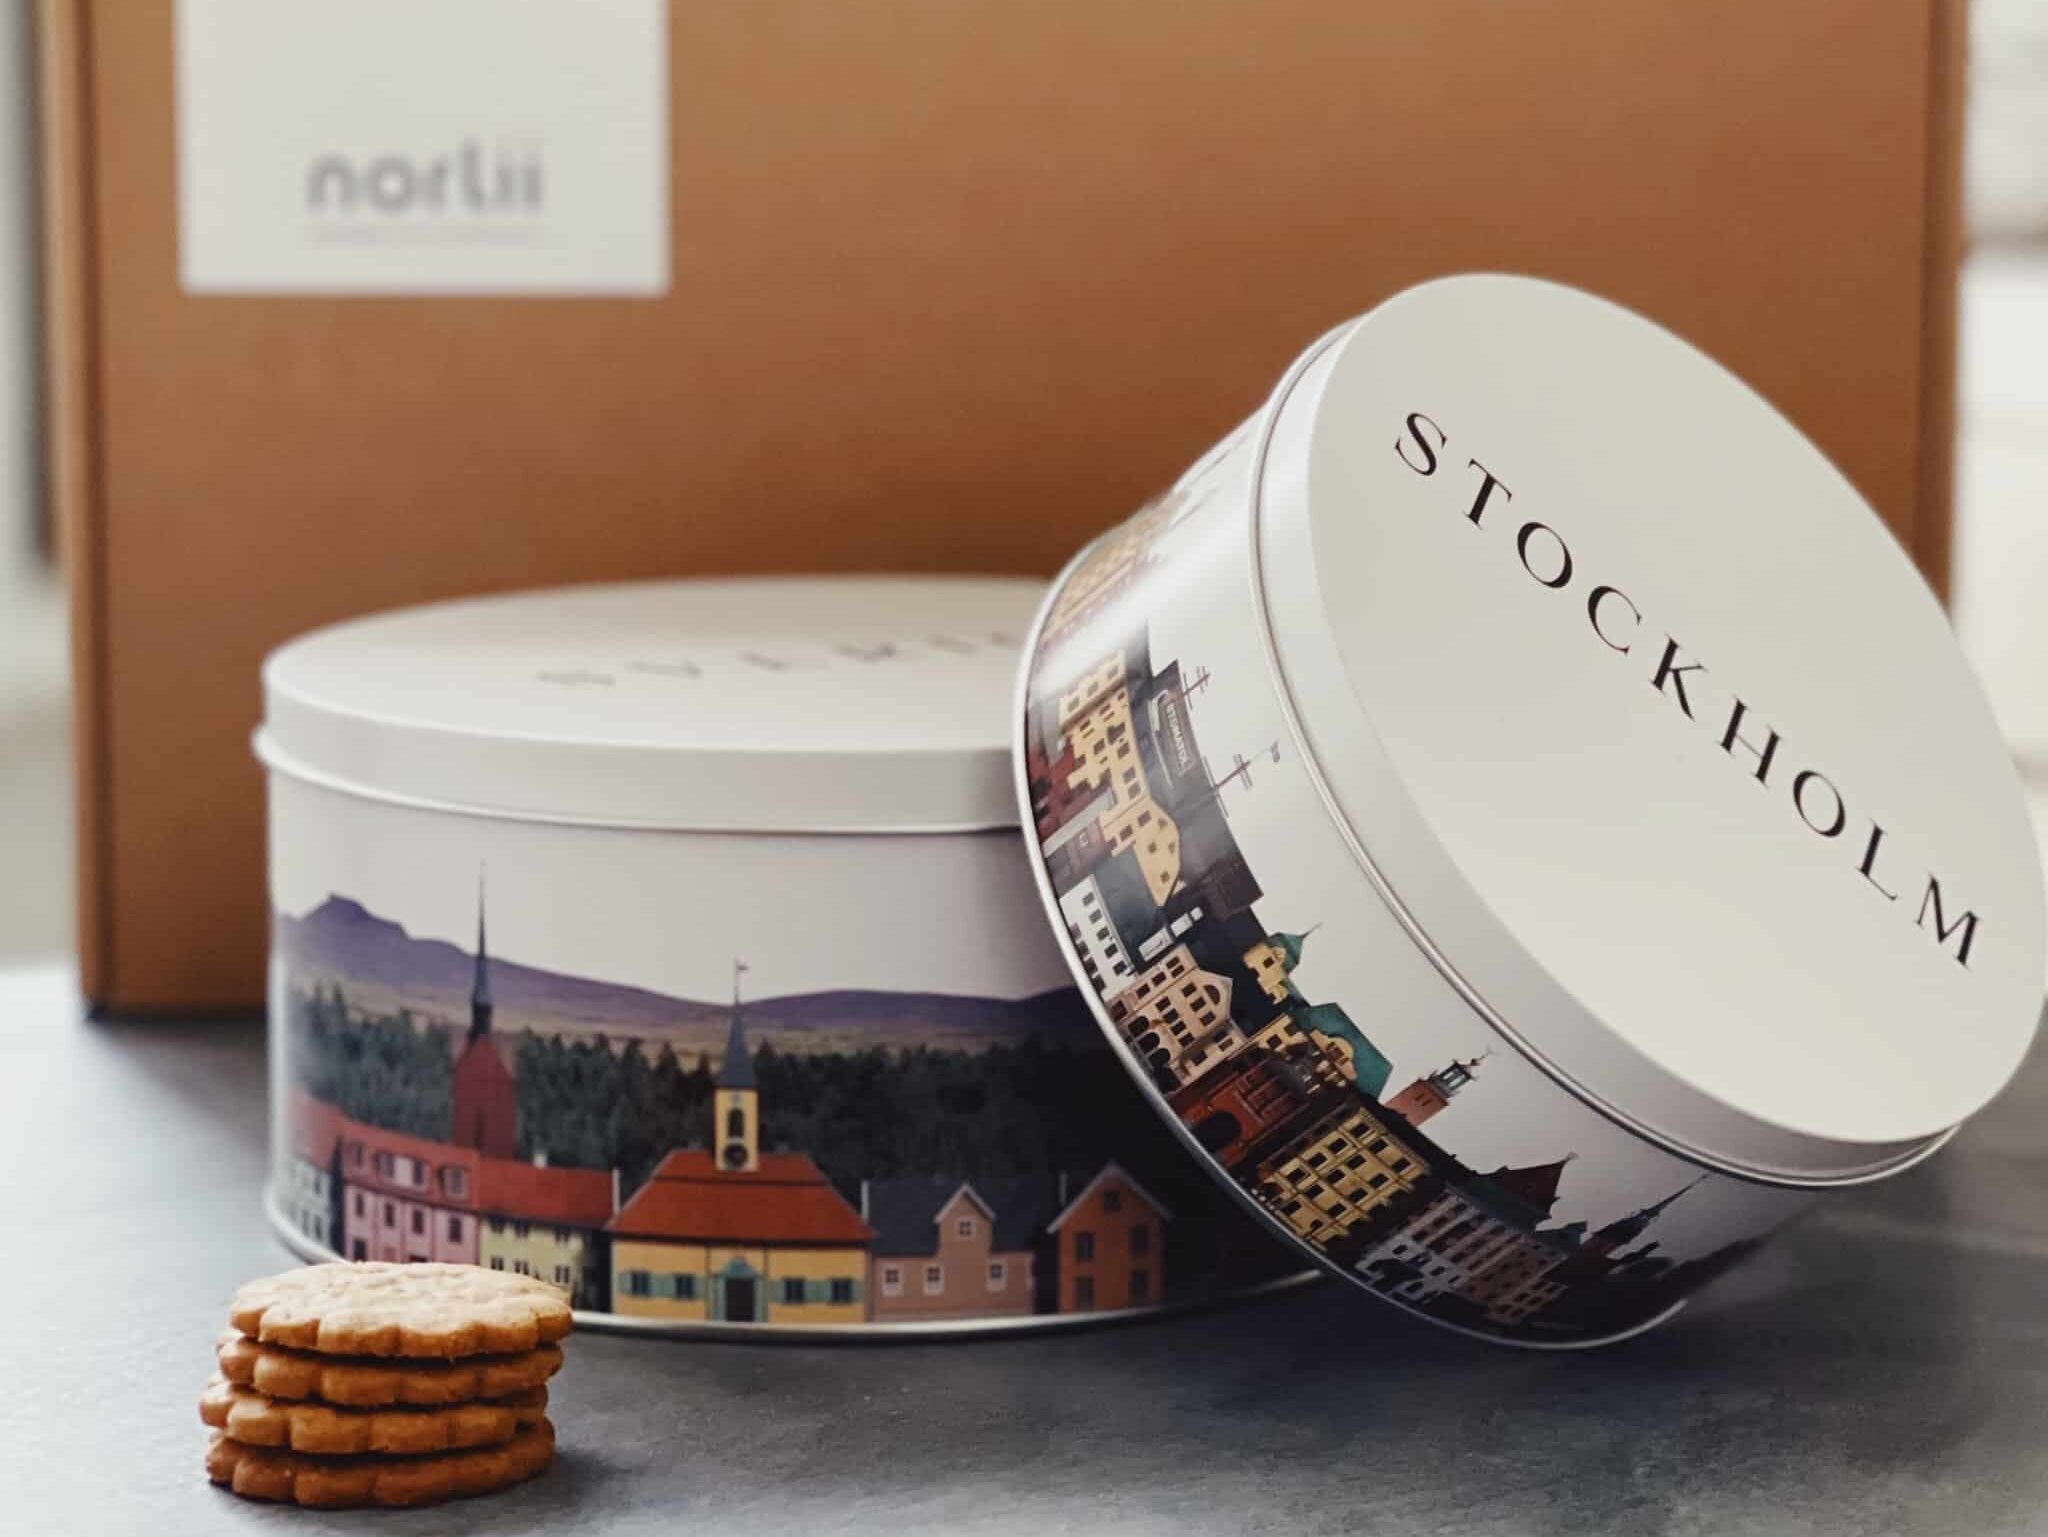 Stockholm style cake tins in Norlii's cake tins